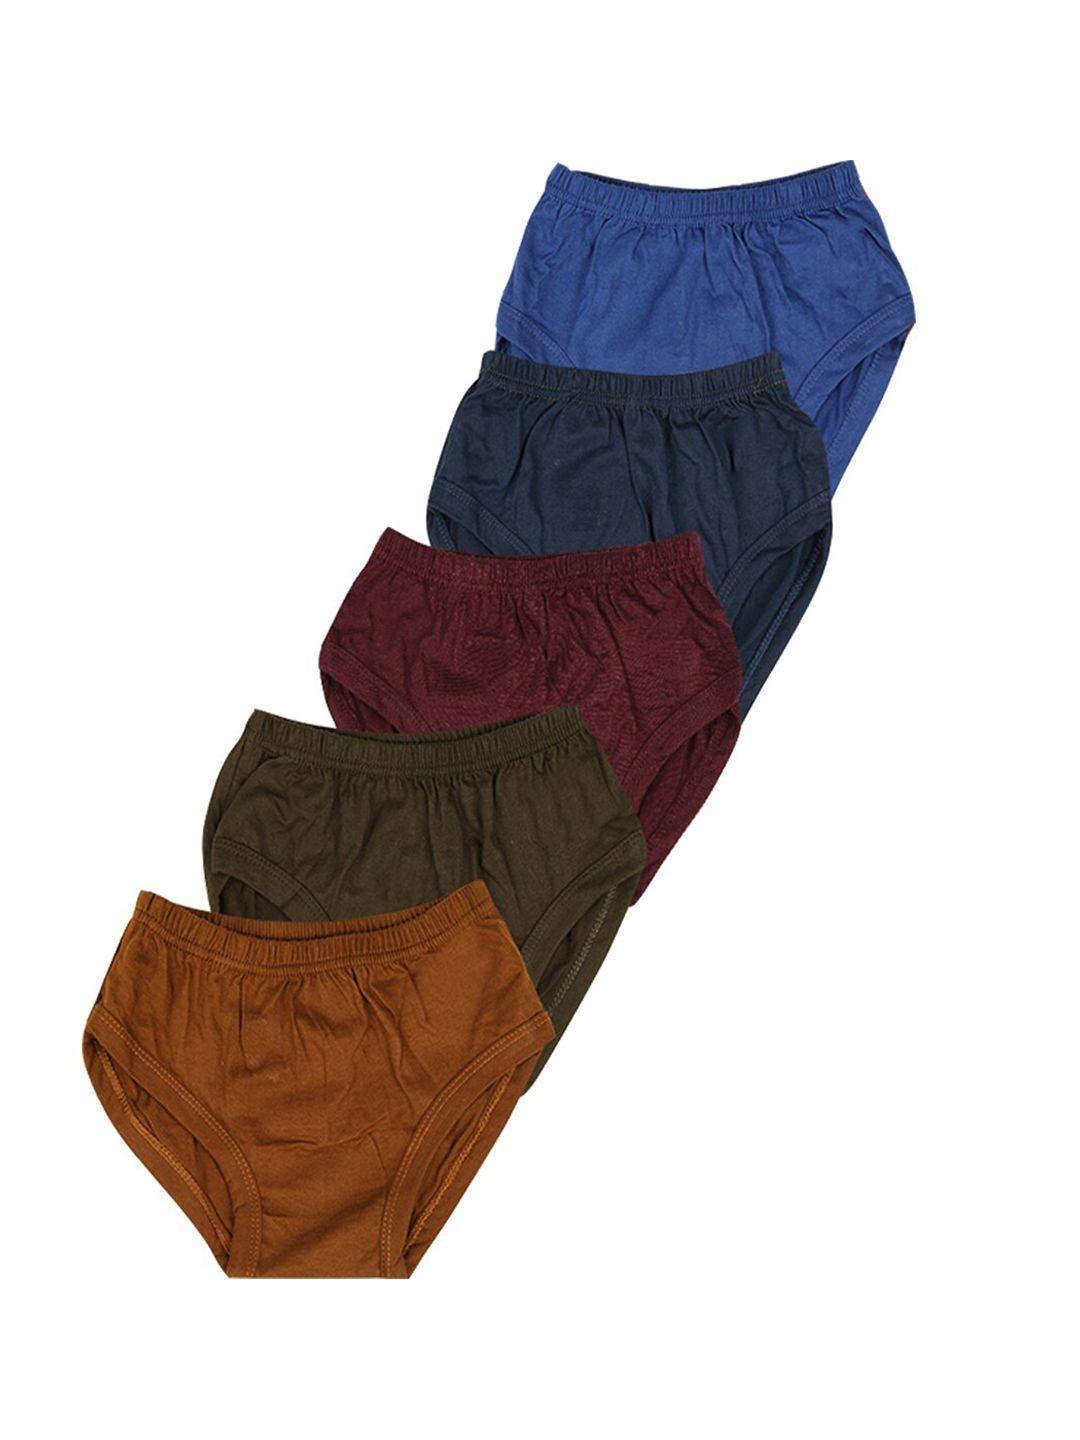 yellowdelight infant boys pack of 6 cotton hipster brief yd 540 boys plain jetty 6-12 m-5p